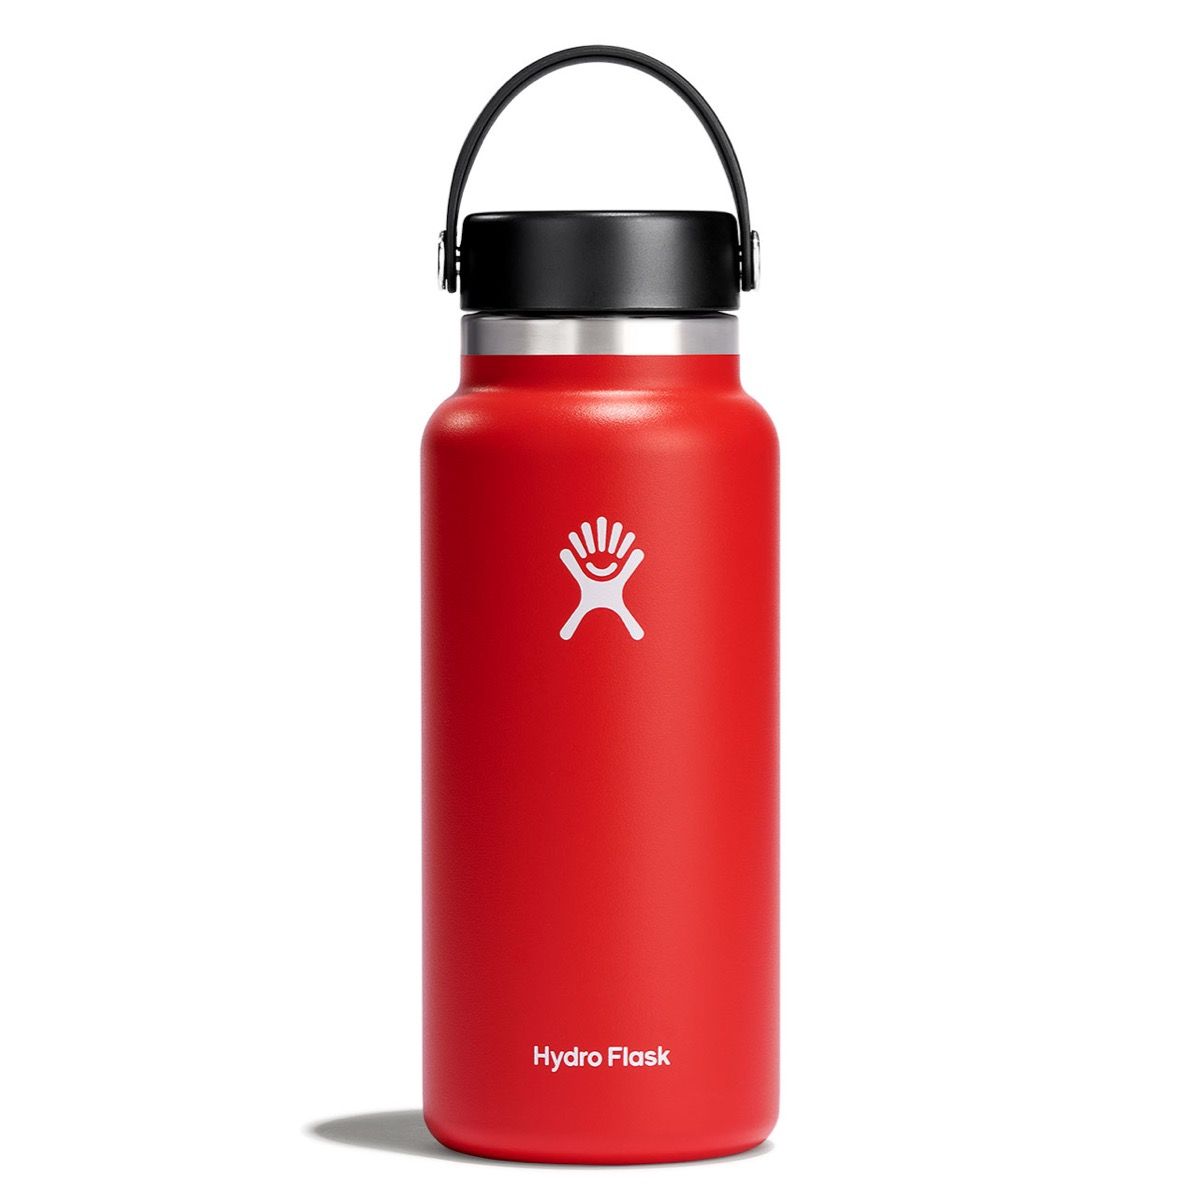 Hydro Flask Large 5 L Insulated Lunch Box , Snapper